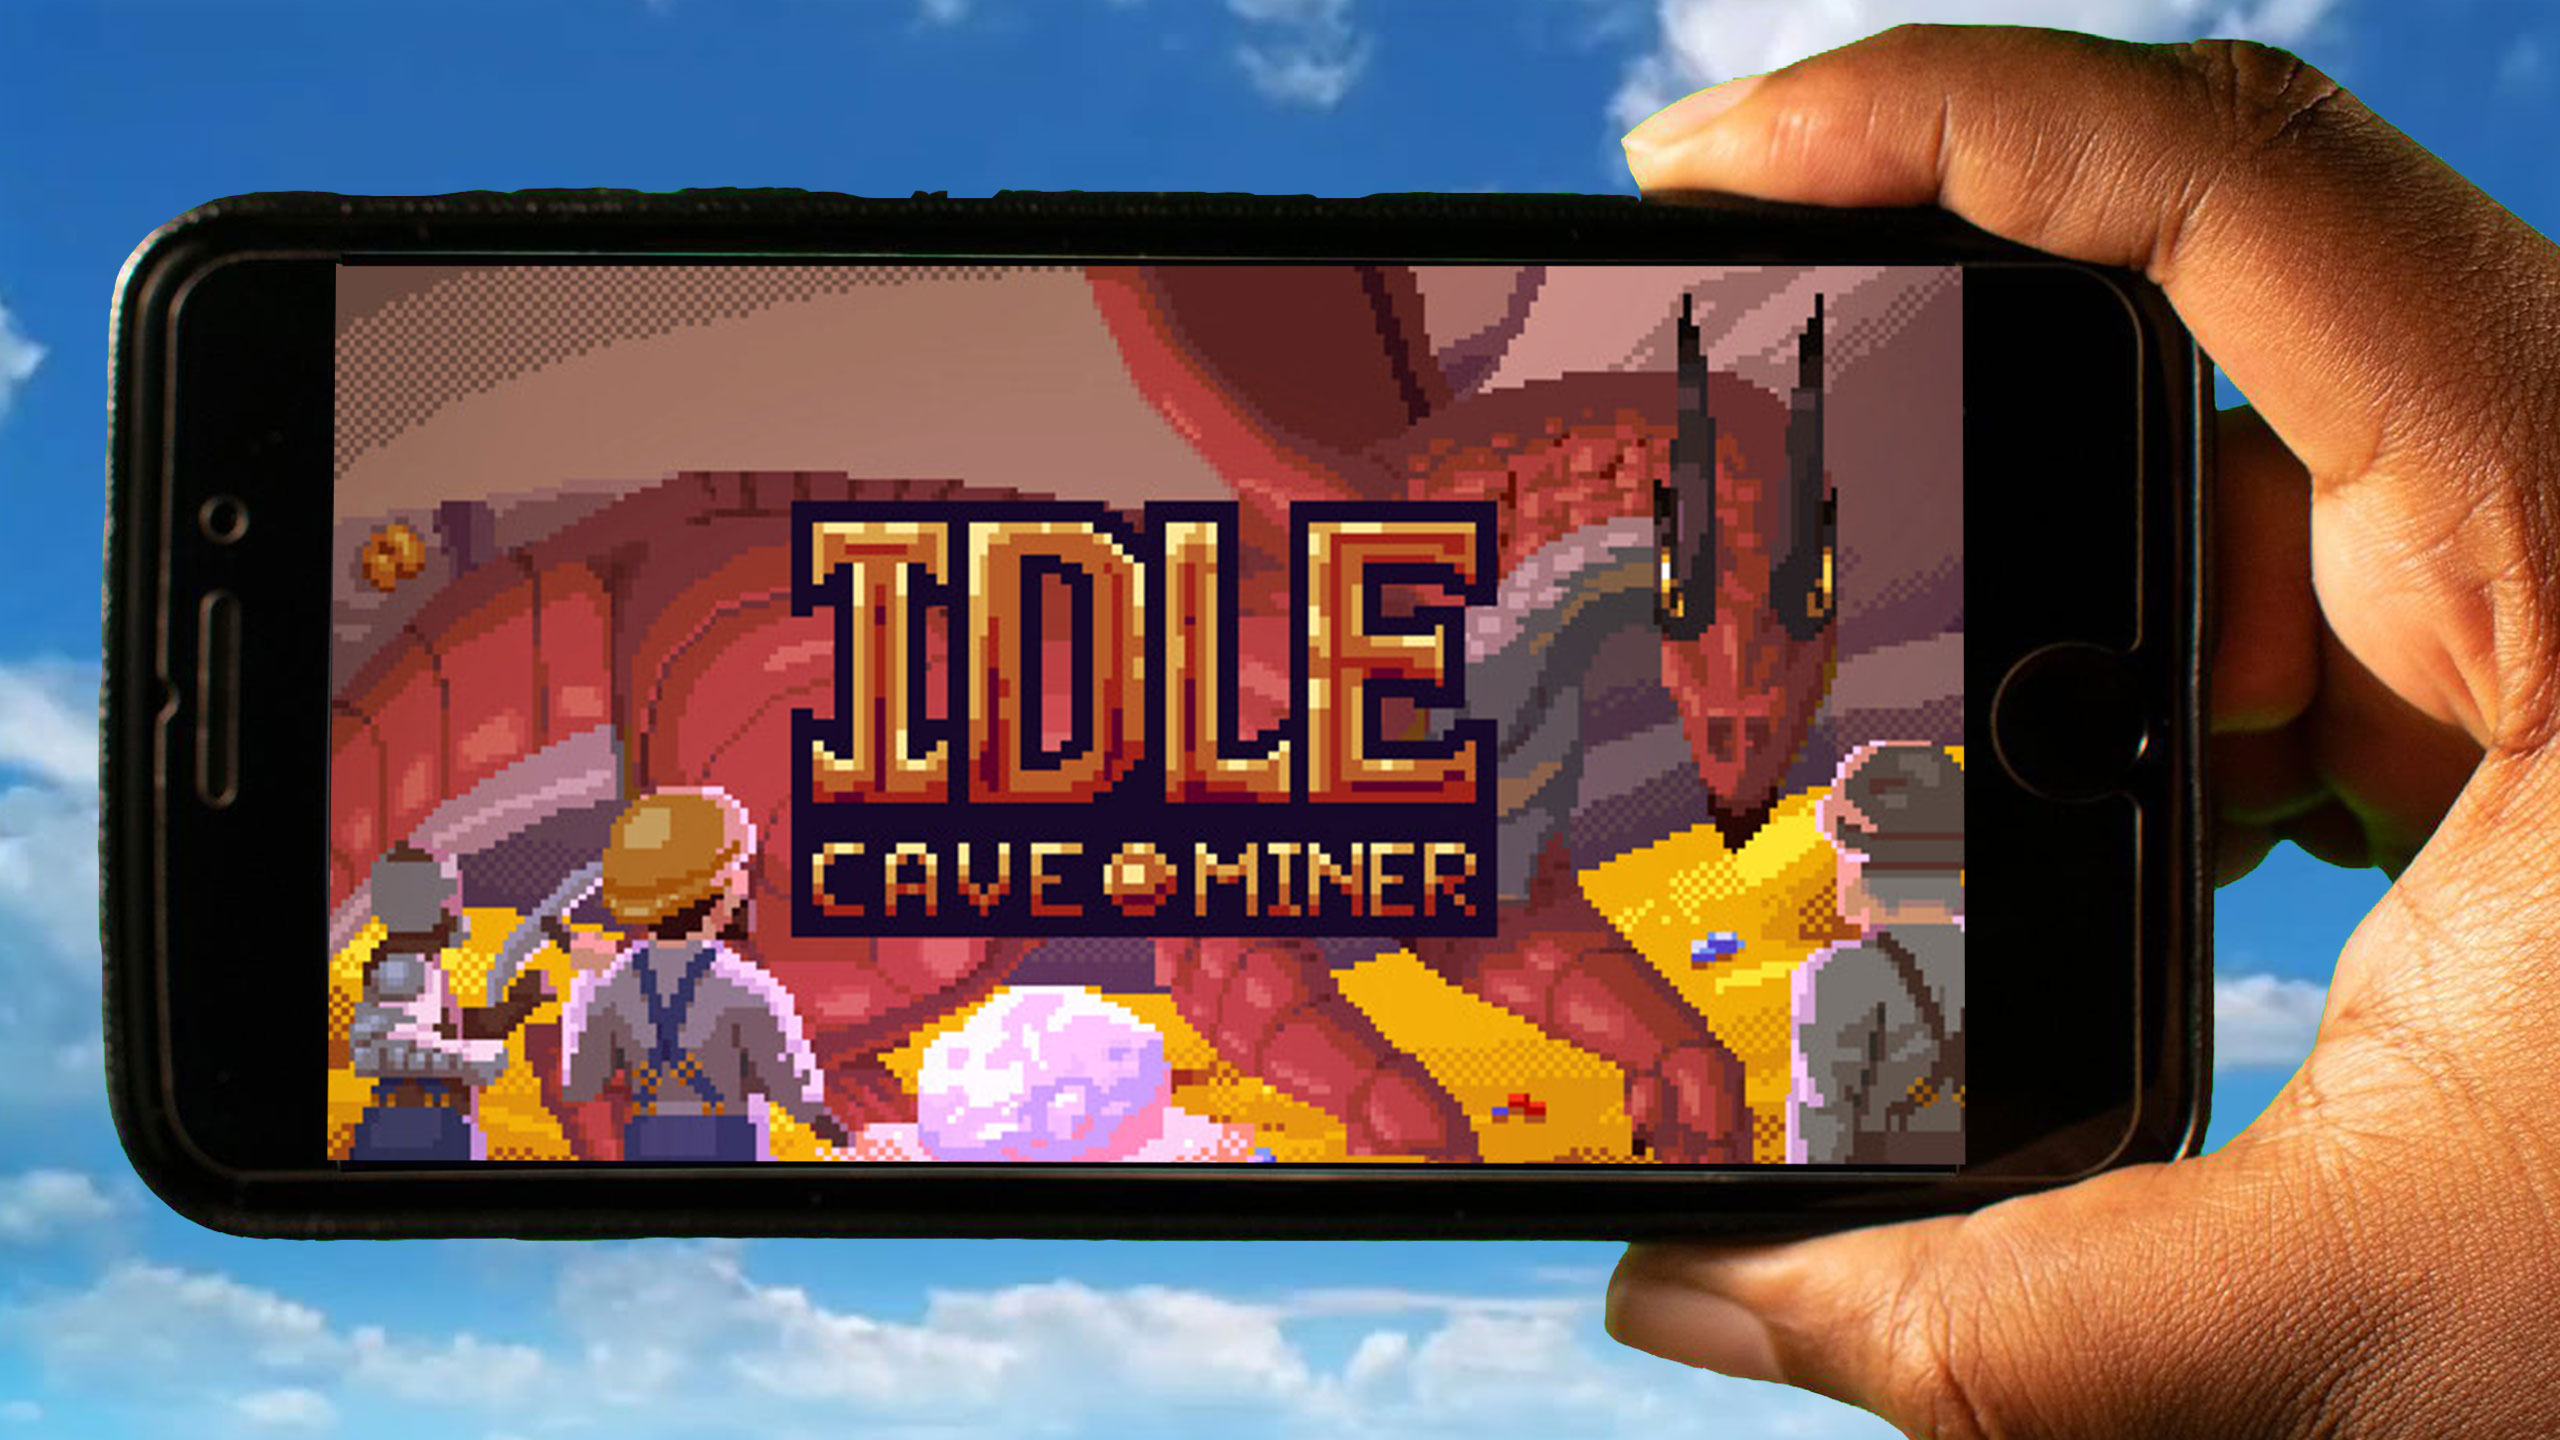 Idle Cave Miner on Steam